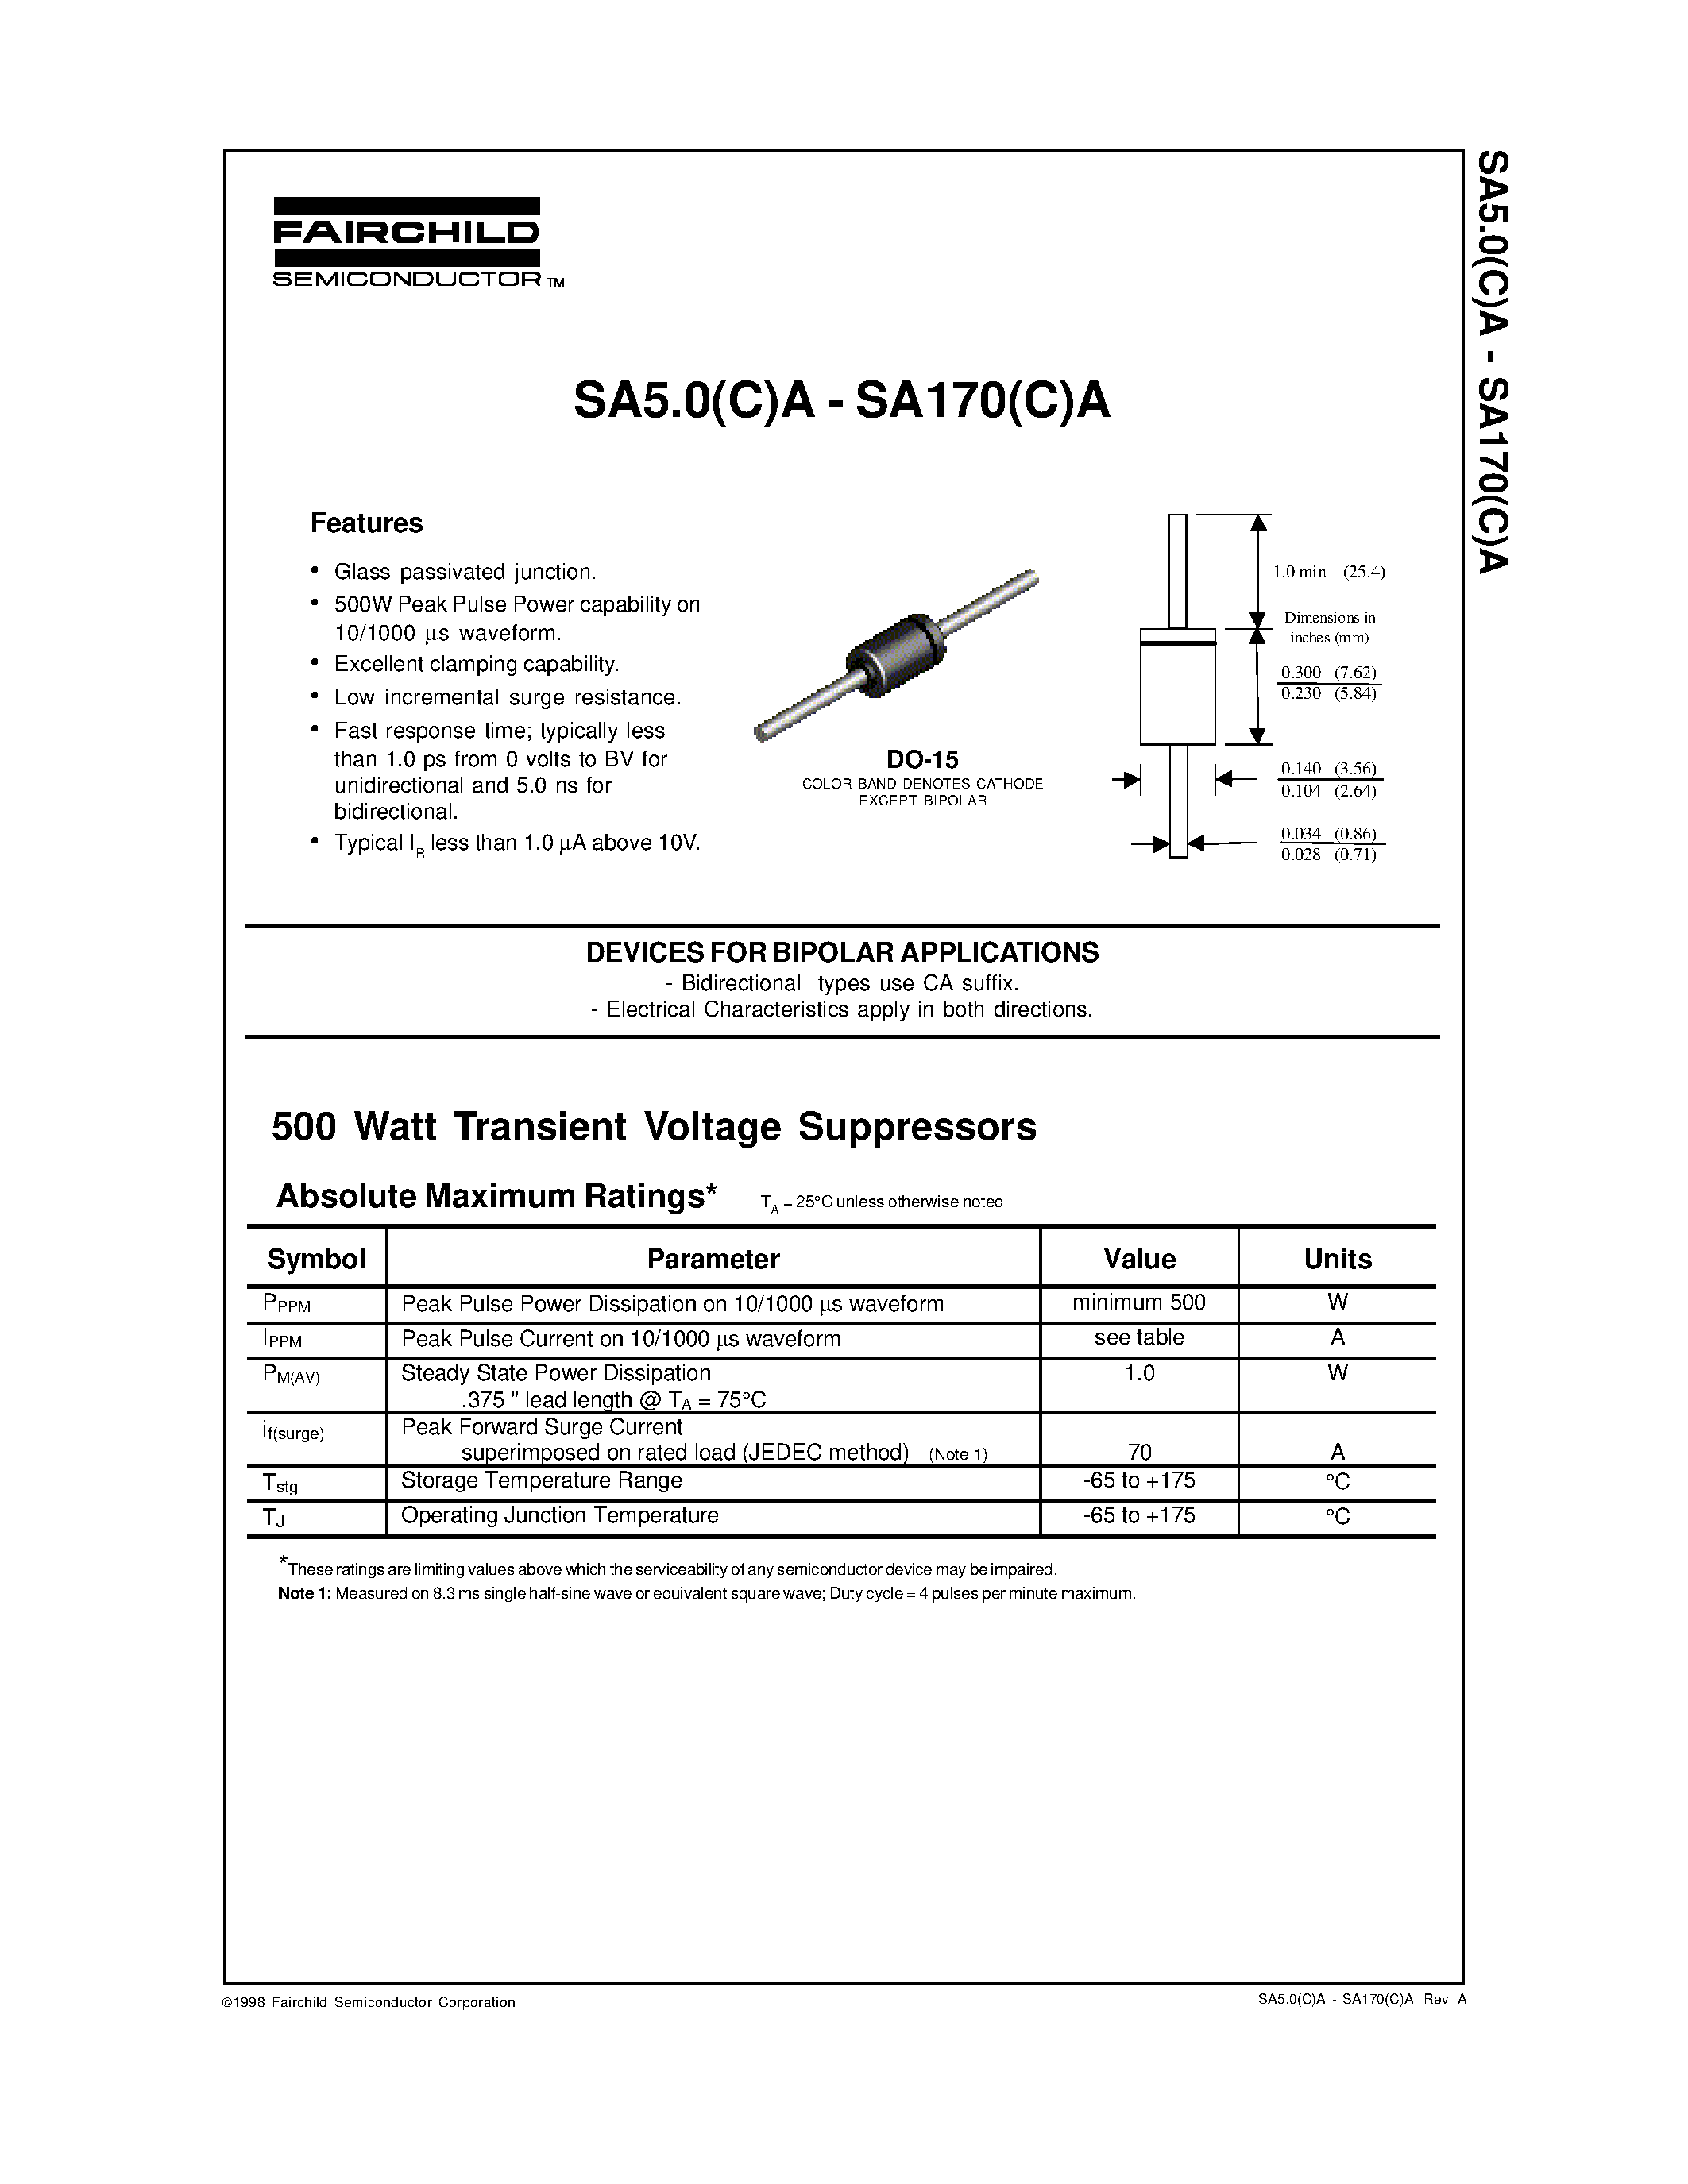 Datasheet SA10(C)A - DEVICES FOR BIPOLAR APPLICATIONS page 1